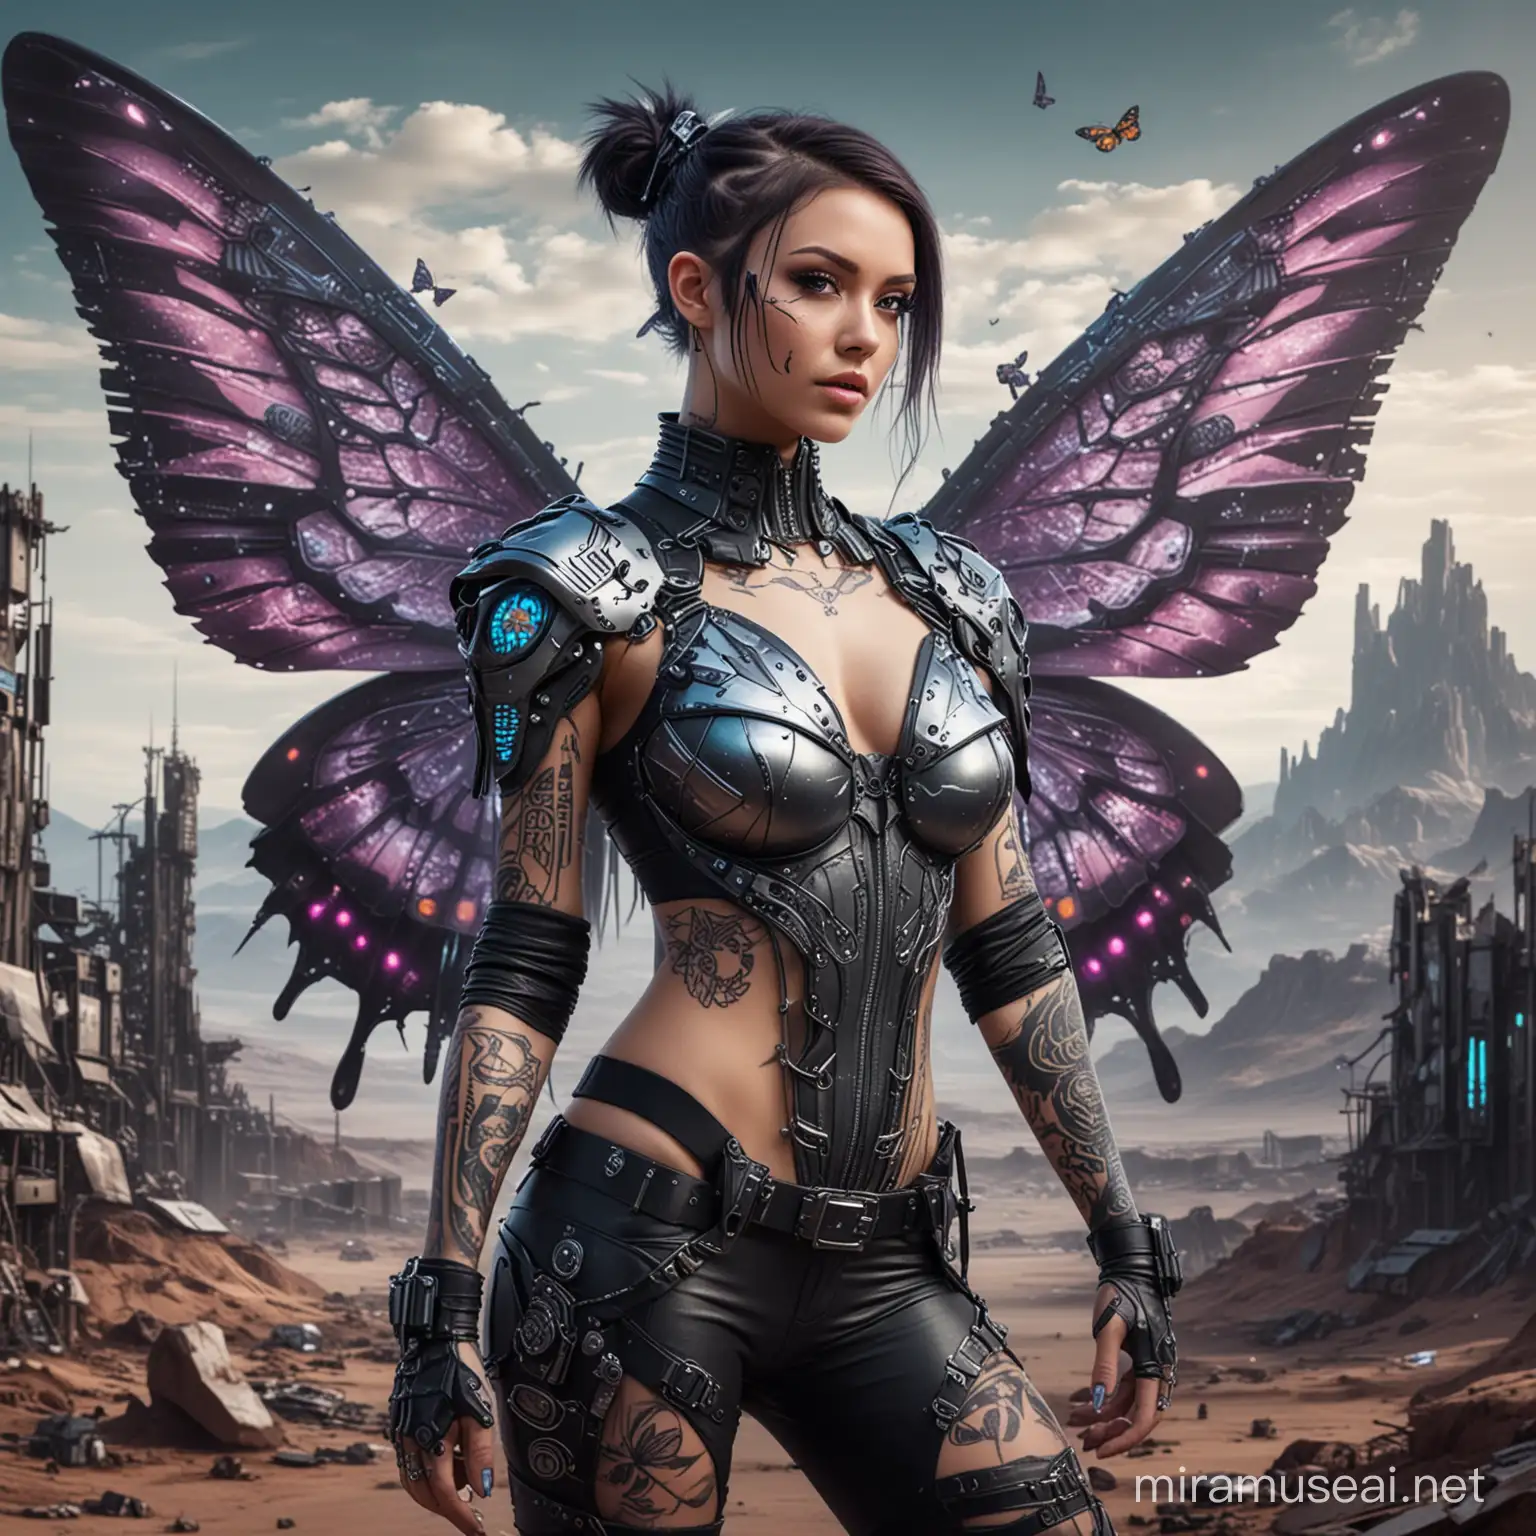 Futuristic Cyberpunk Woman with Butterfly Wings and Tattoos